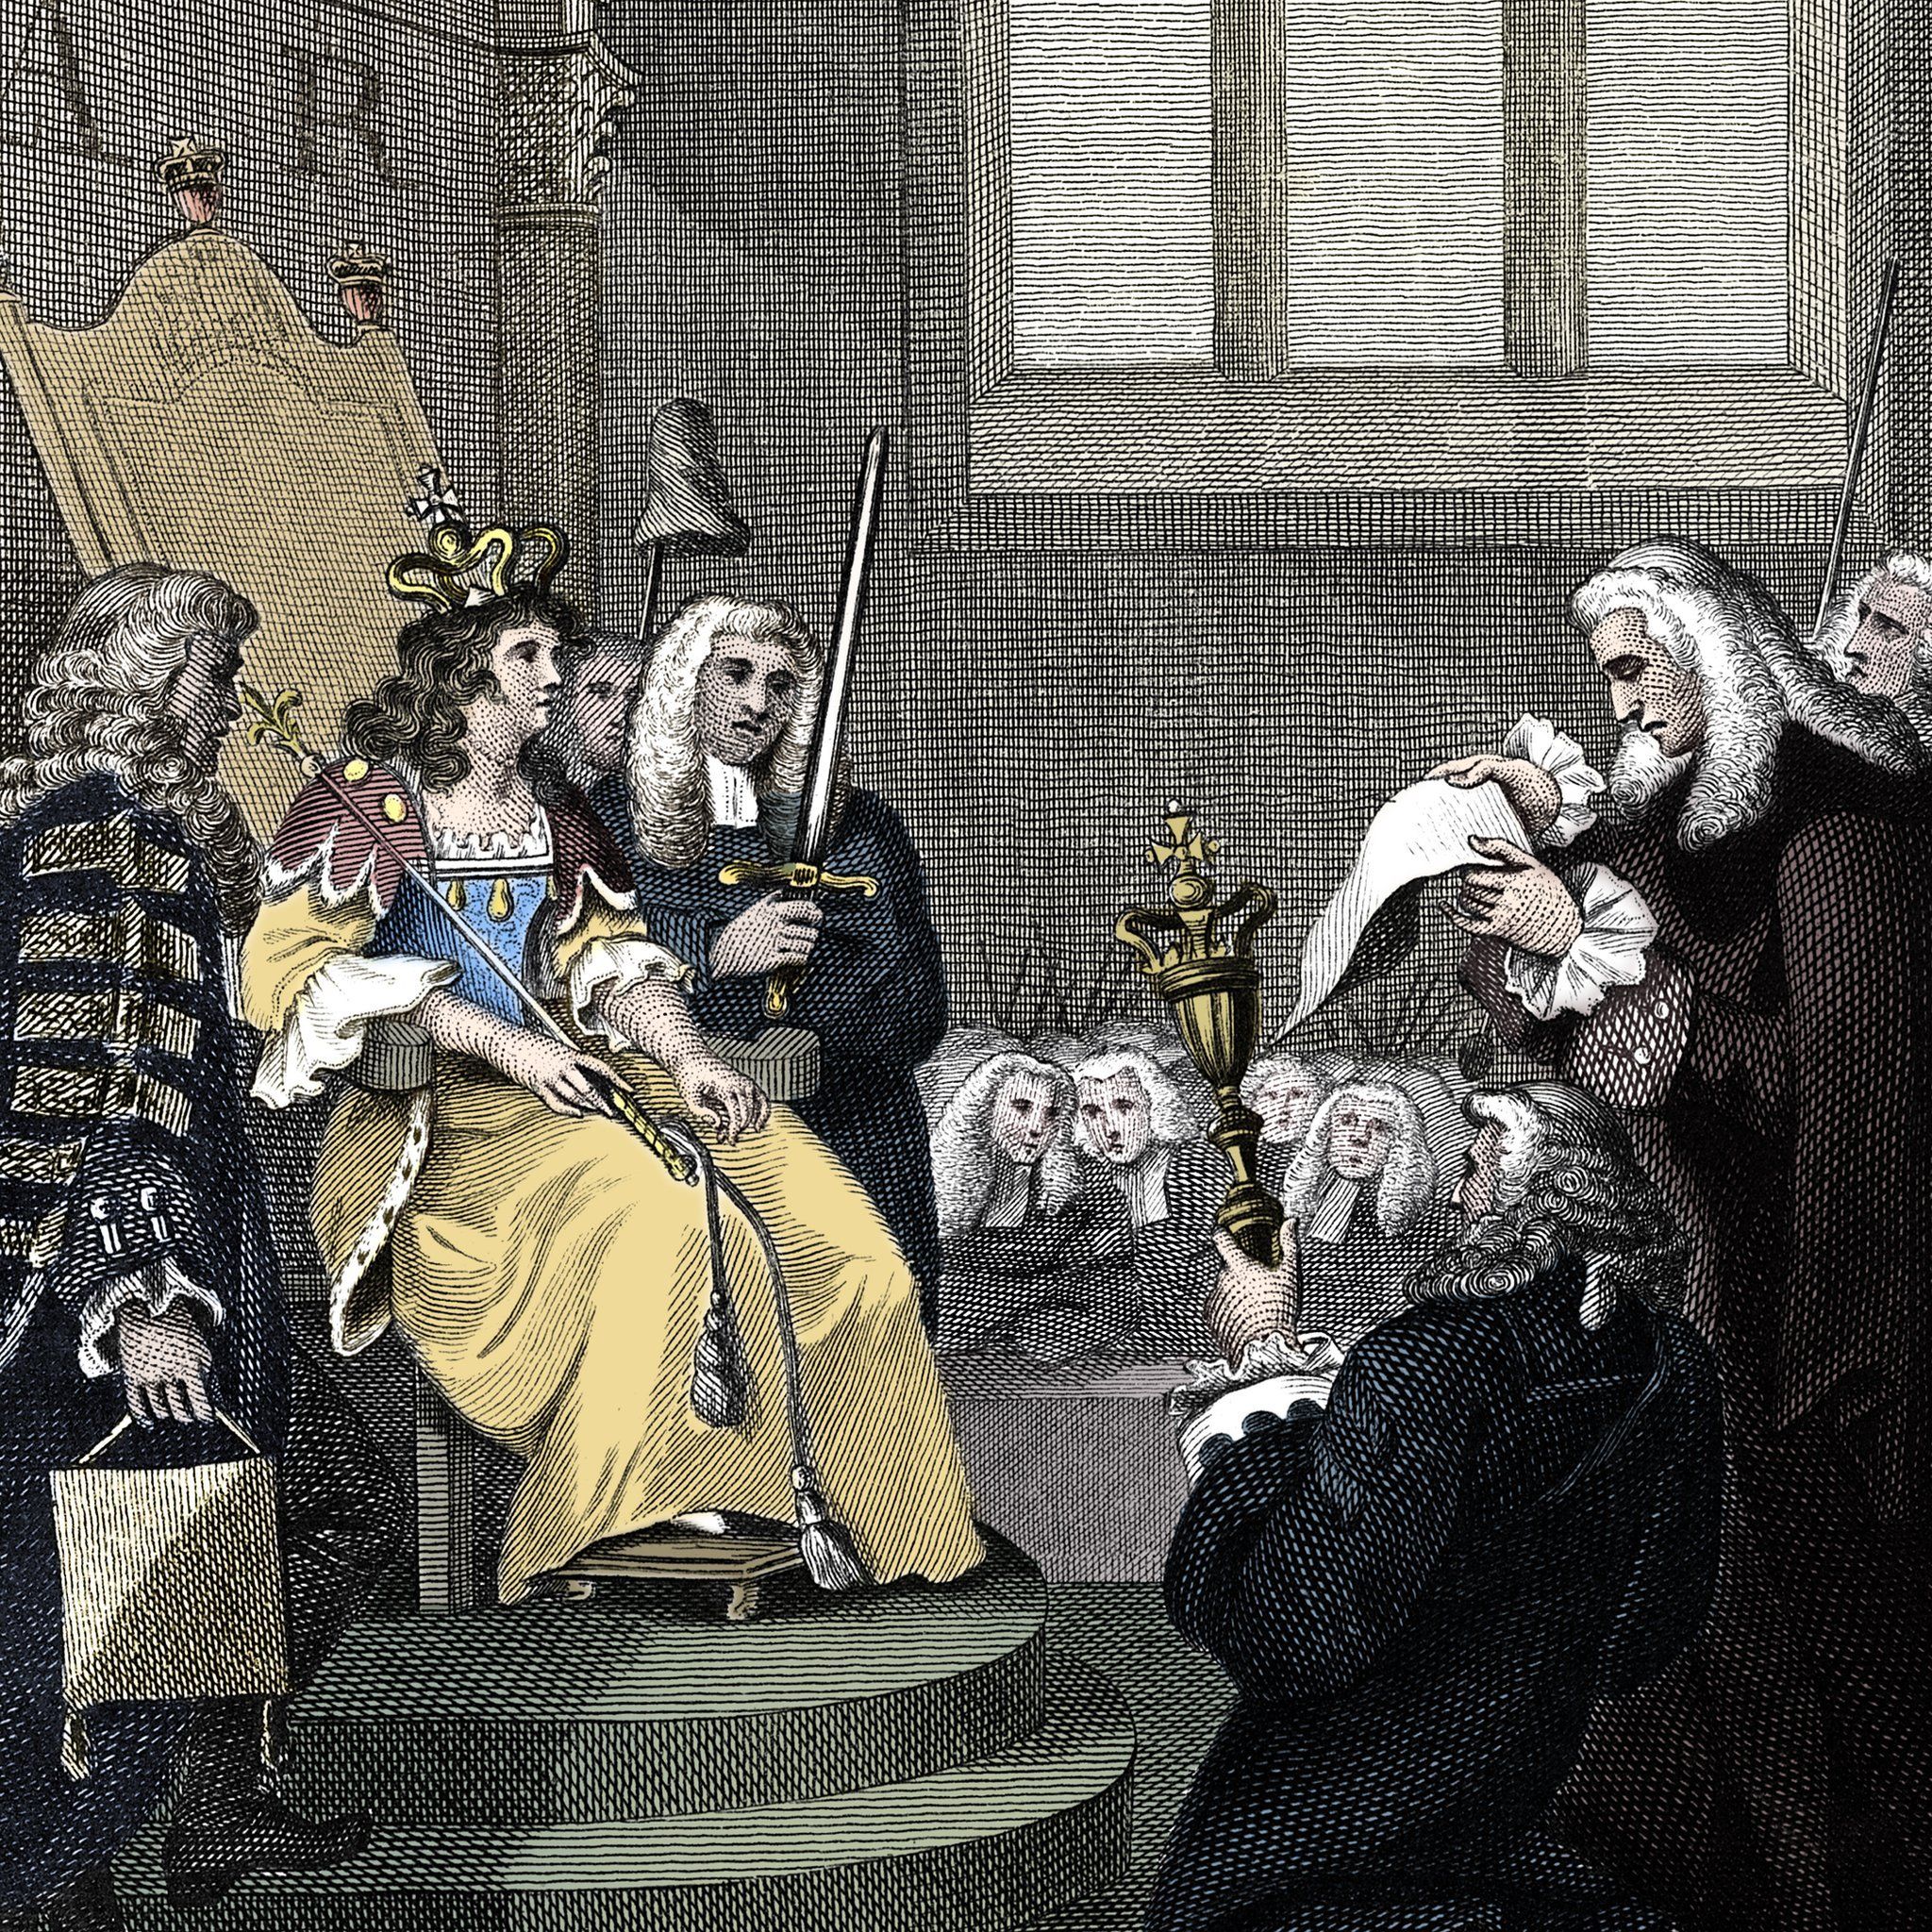 The Acts of Union between England and Scotland being read before Queen Anne, 1707.